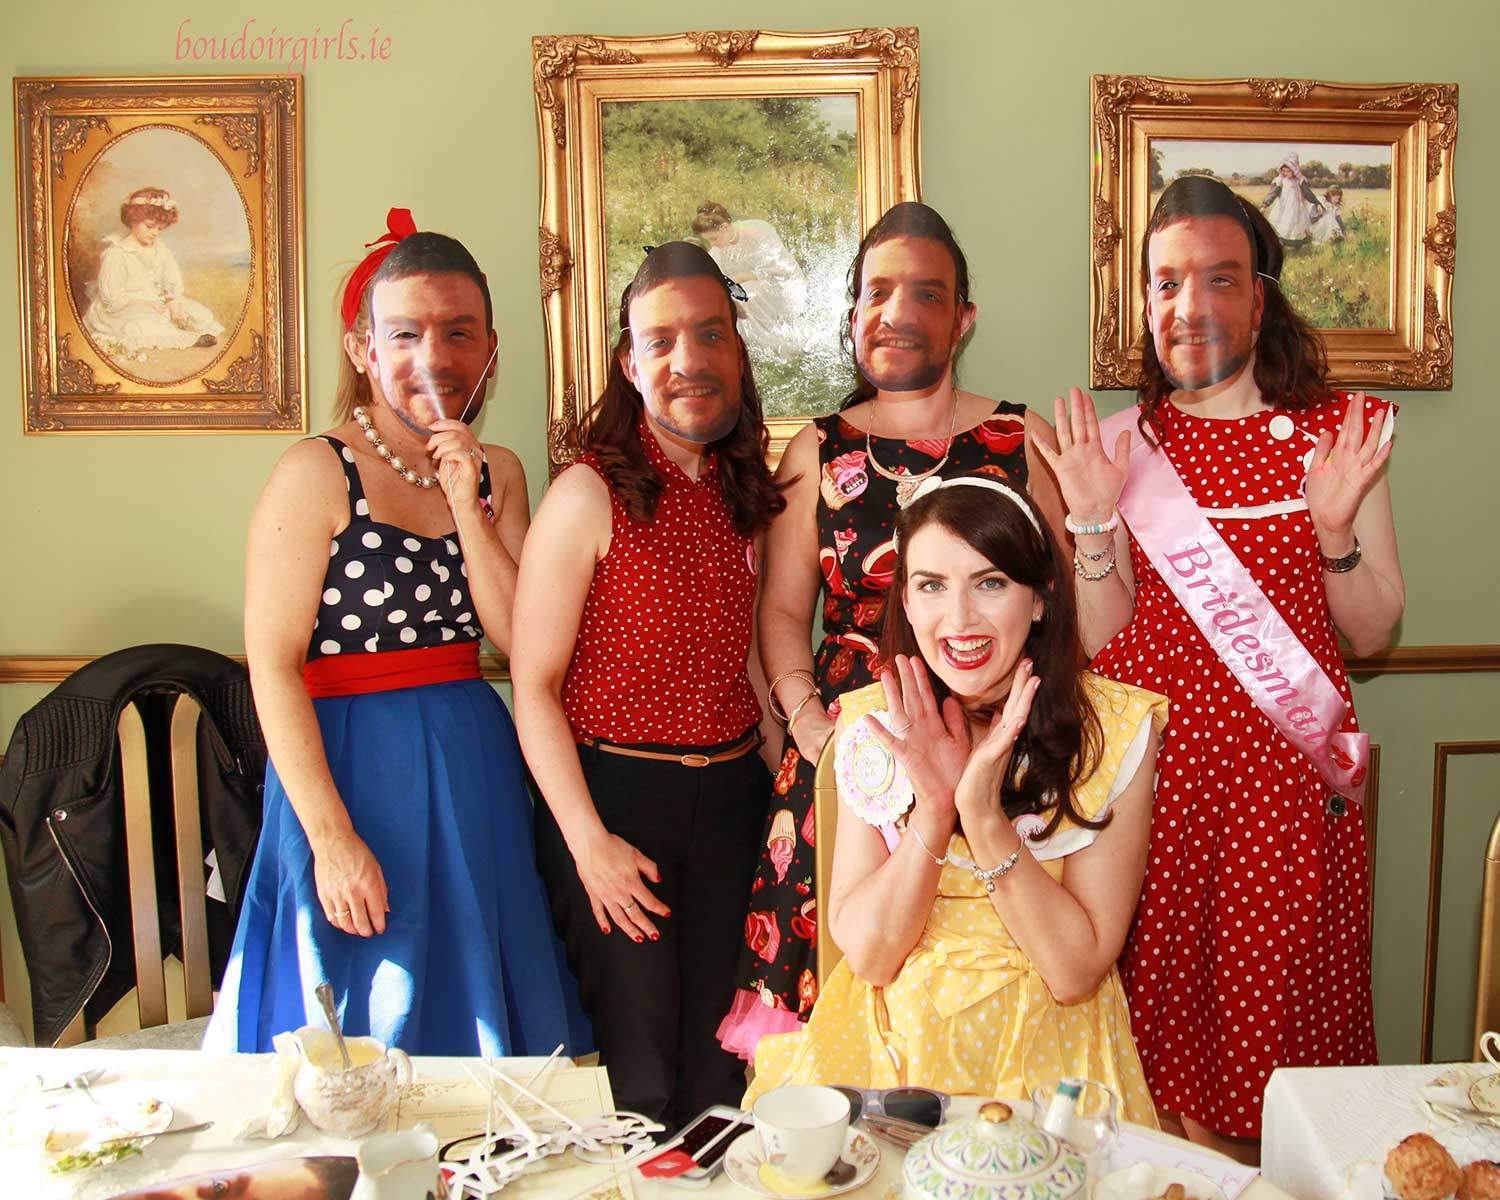 Tanya's Vintage Hen Party in Galway